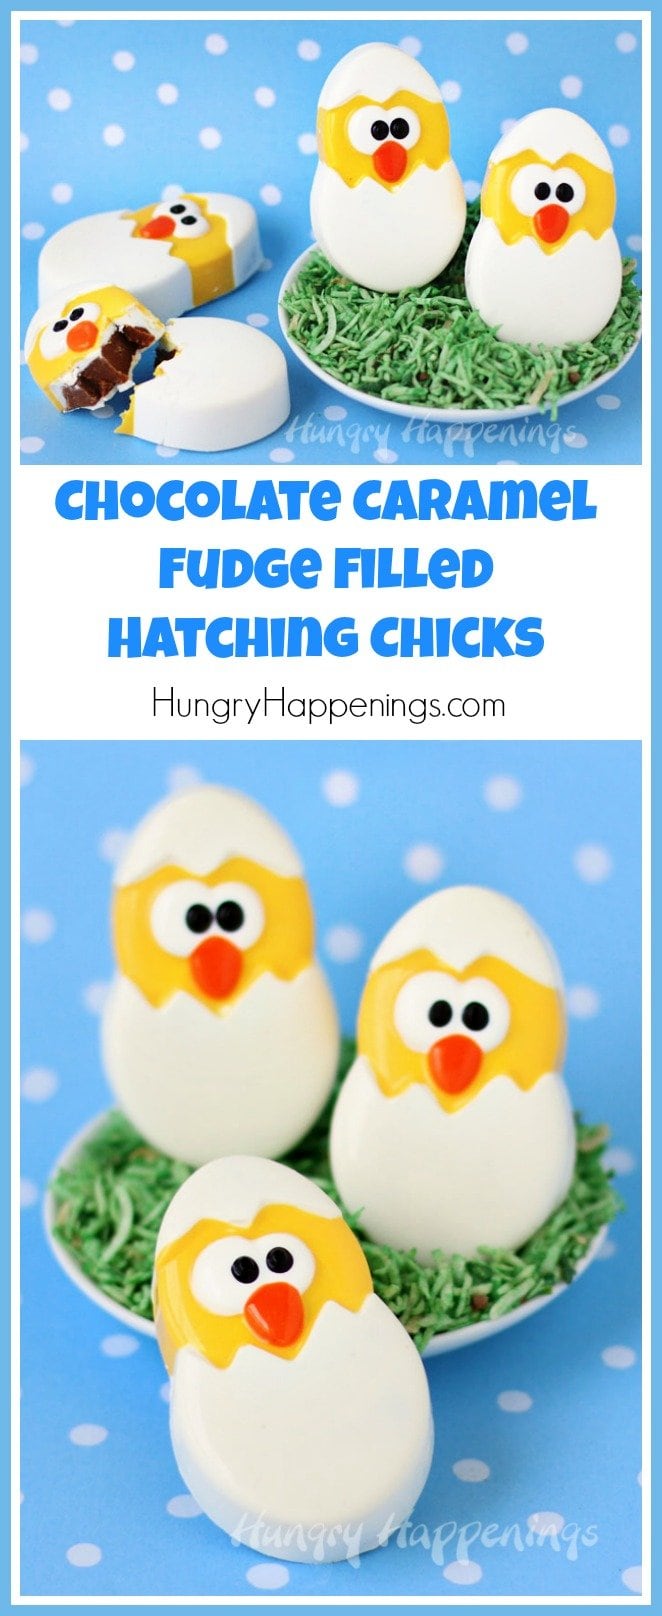 Add some super cute Chocolate Caramel Fudge filled Hatching Chicks to your Easter baskets this year. Your kids will love these homemade white chocolate Easter chicks, each filled with creamy caramel flavored milk chocolate fudge.